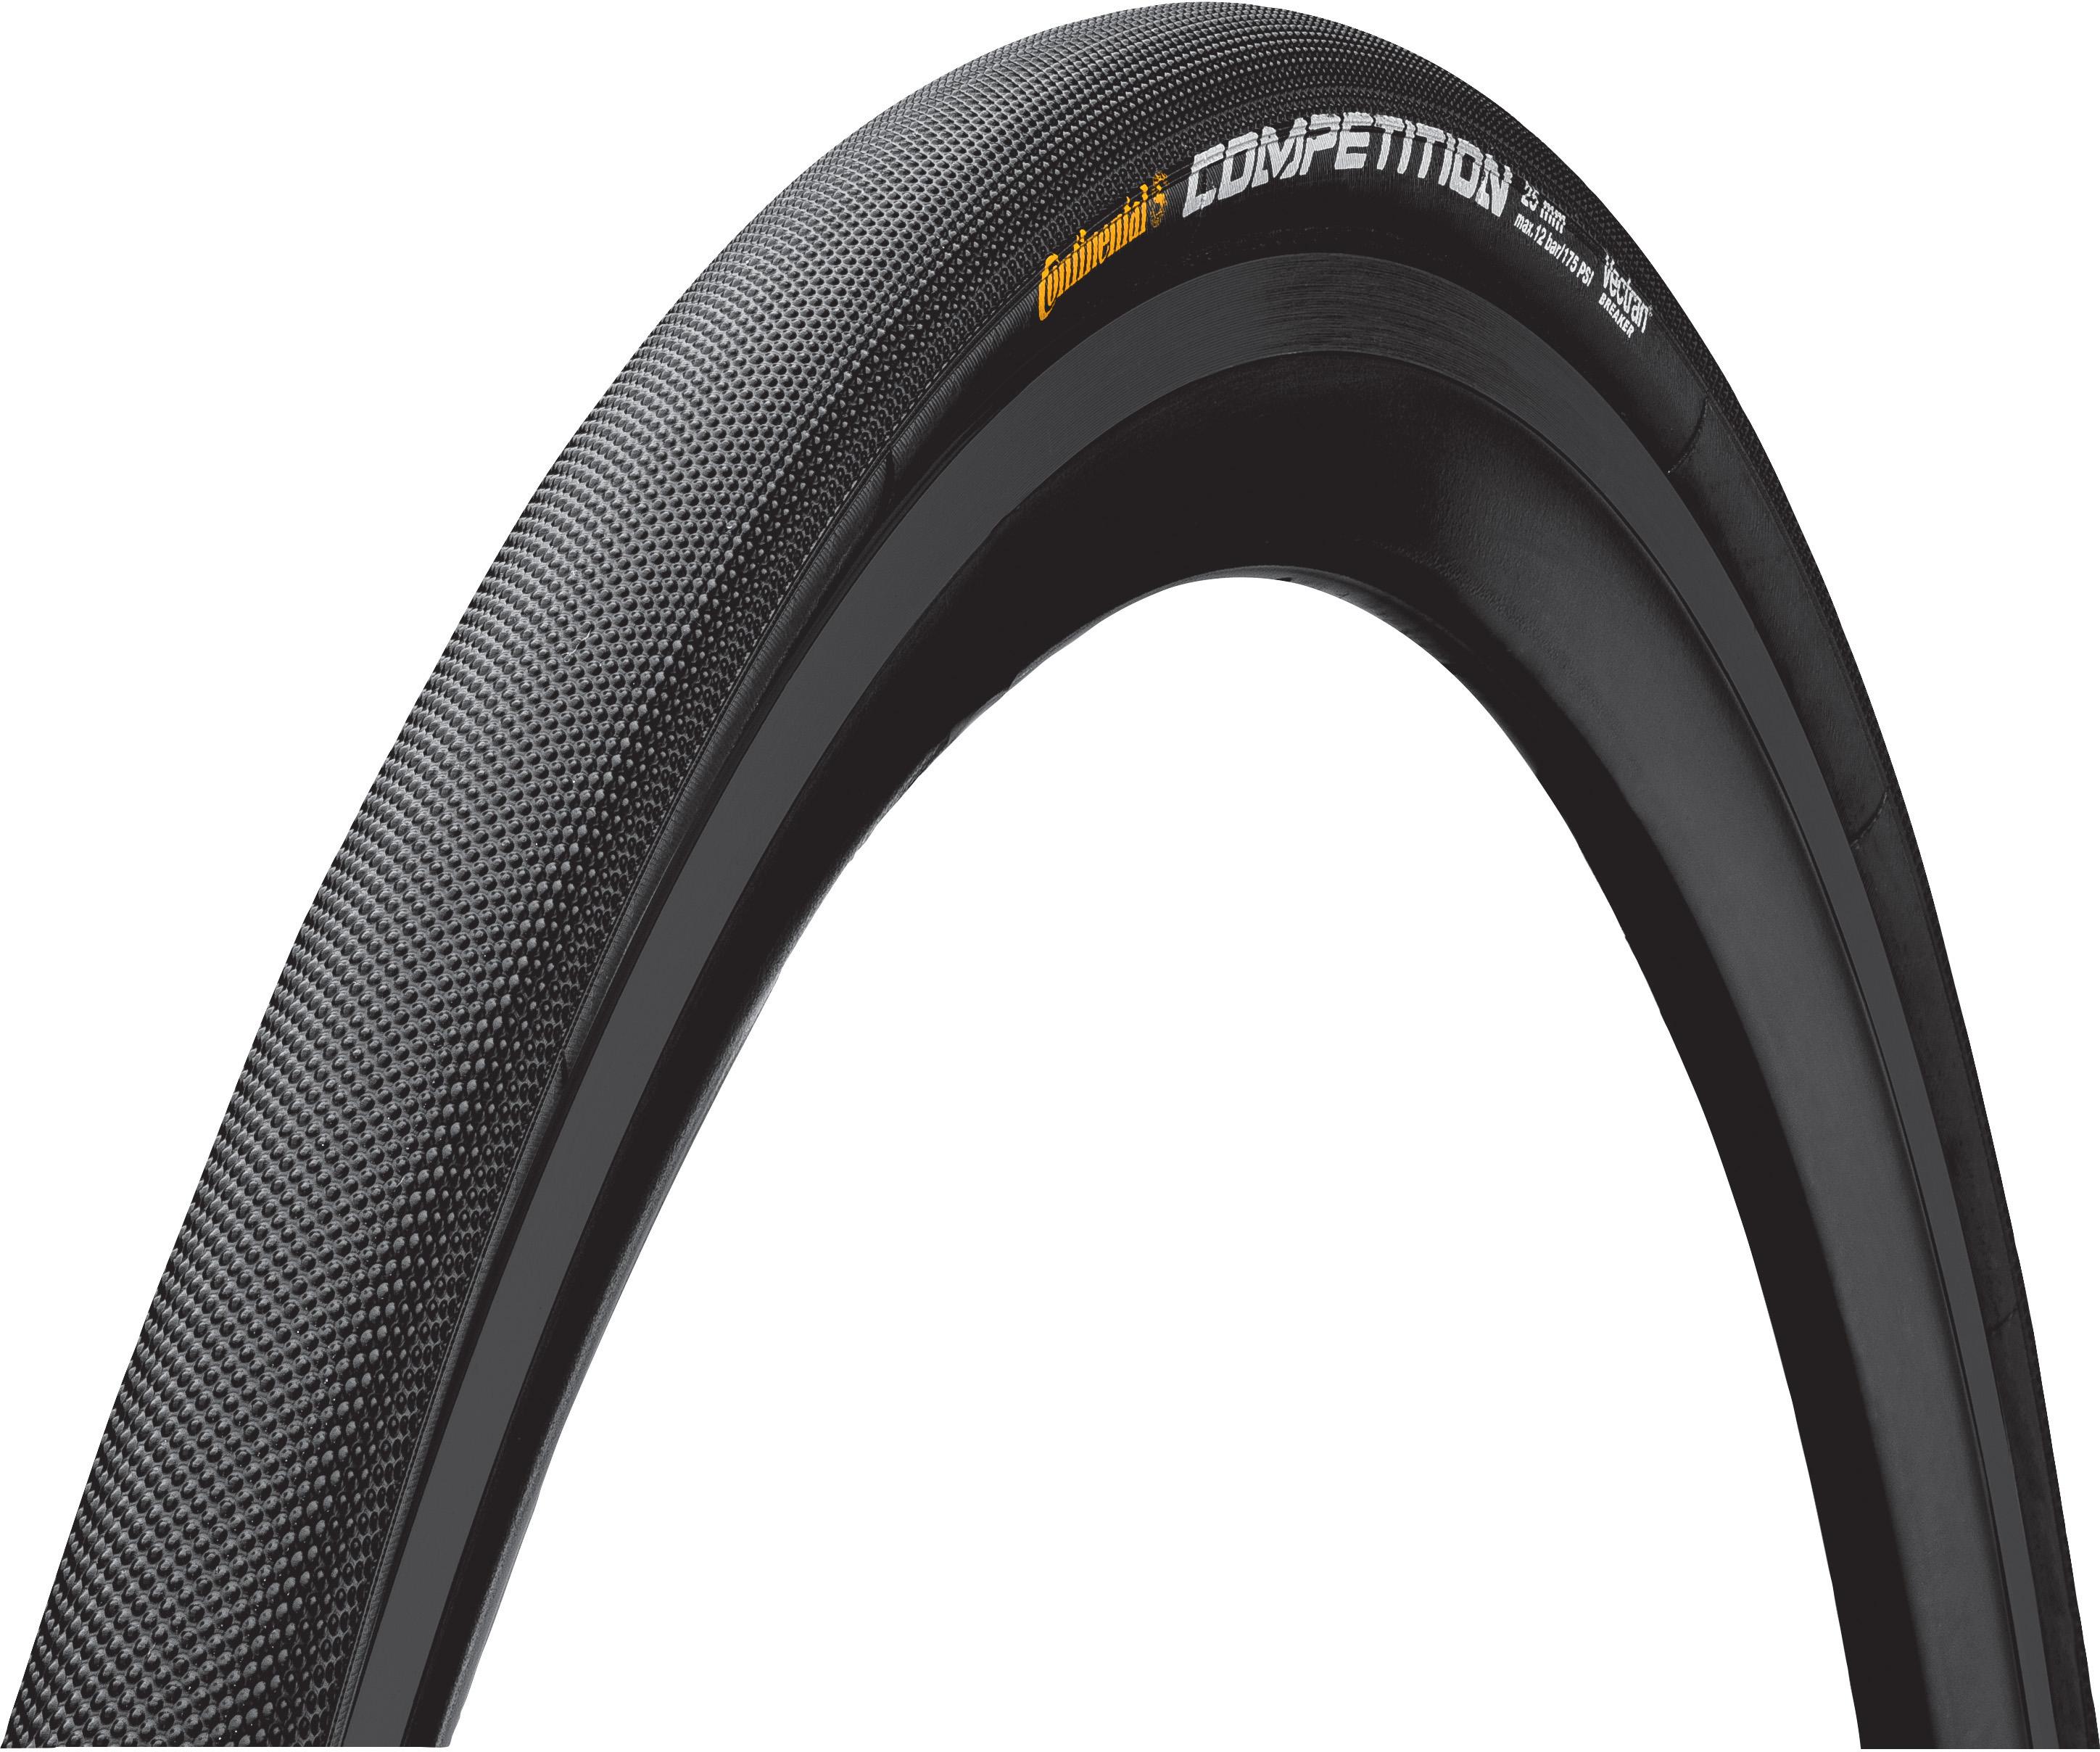 Continental Competition Tubular Road Bike Tyre  Black